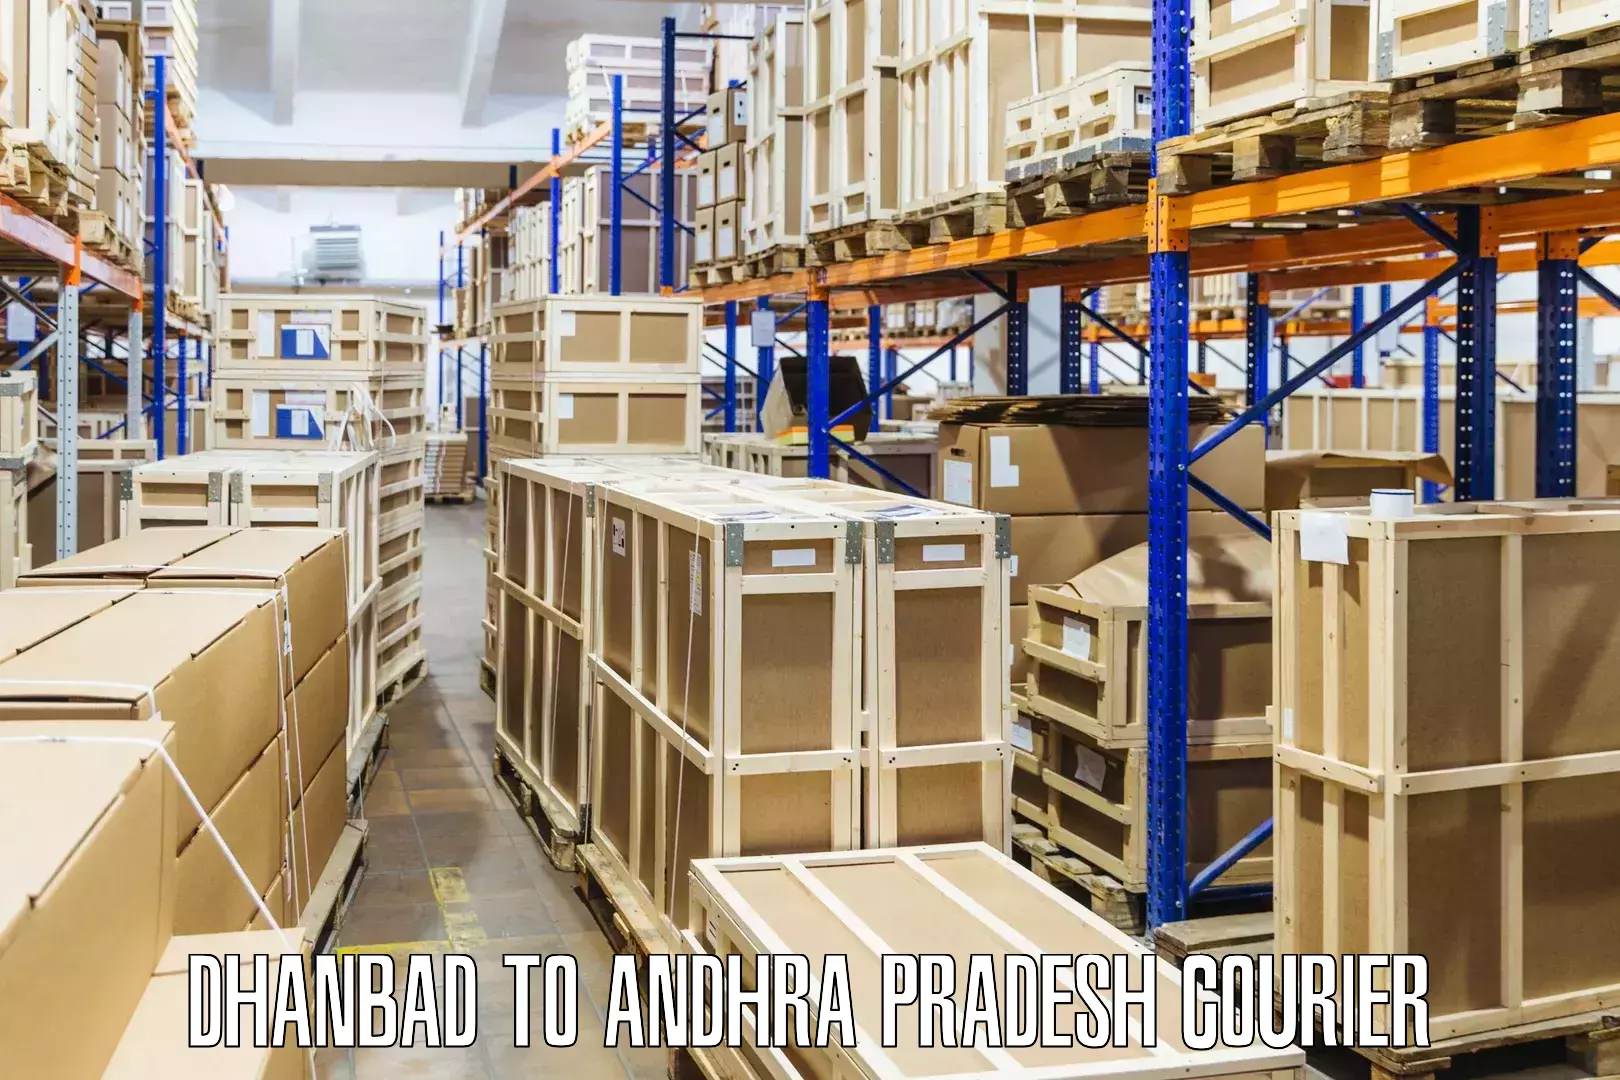 High-priority parcel service Dhanbad to Cuddapah